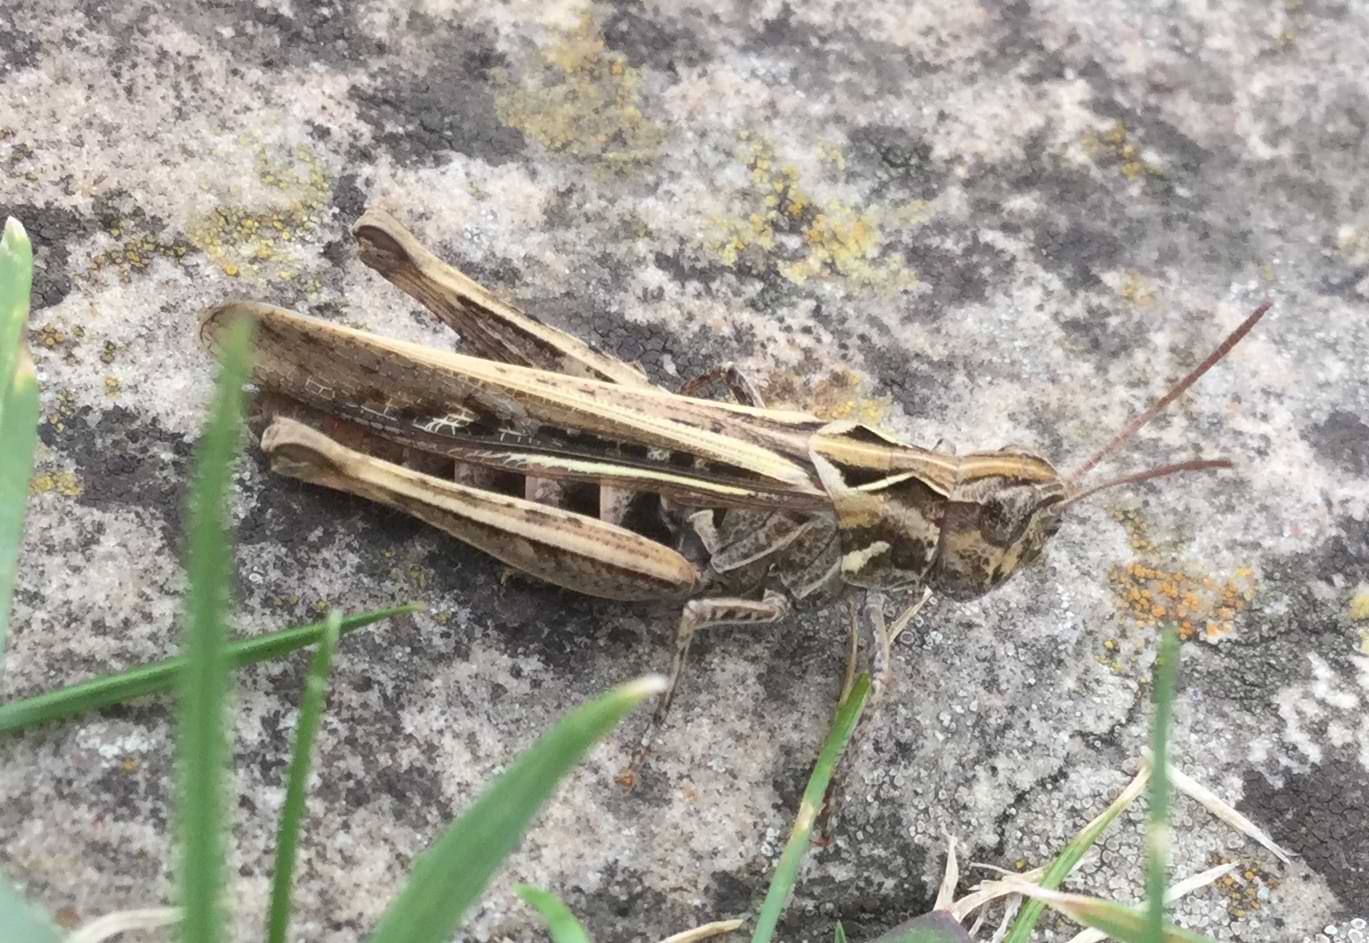 Photo of a grasshopper sitting on stone slab. The insect is mostly green but has an intricate pattern of lighter and darker coloured lines running down and across its entire body.